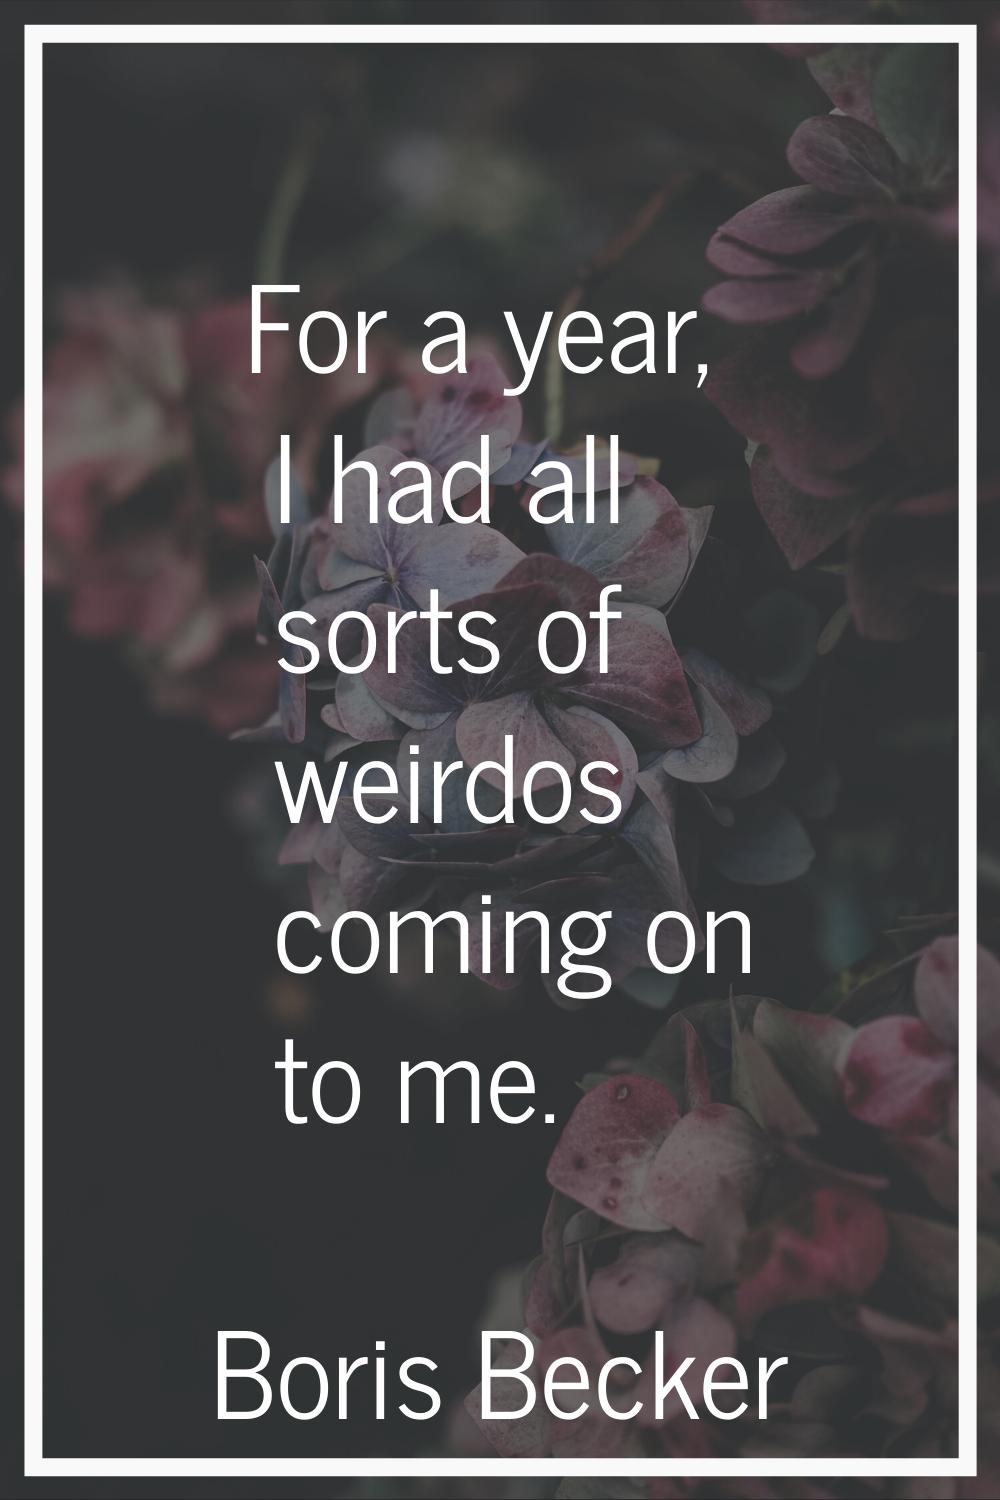 For a year, I had all sorts of weirdos coming on to me.